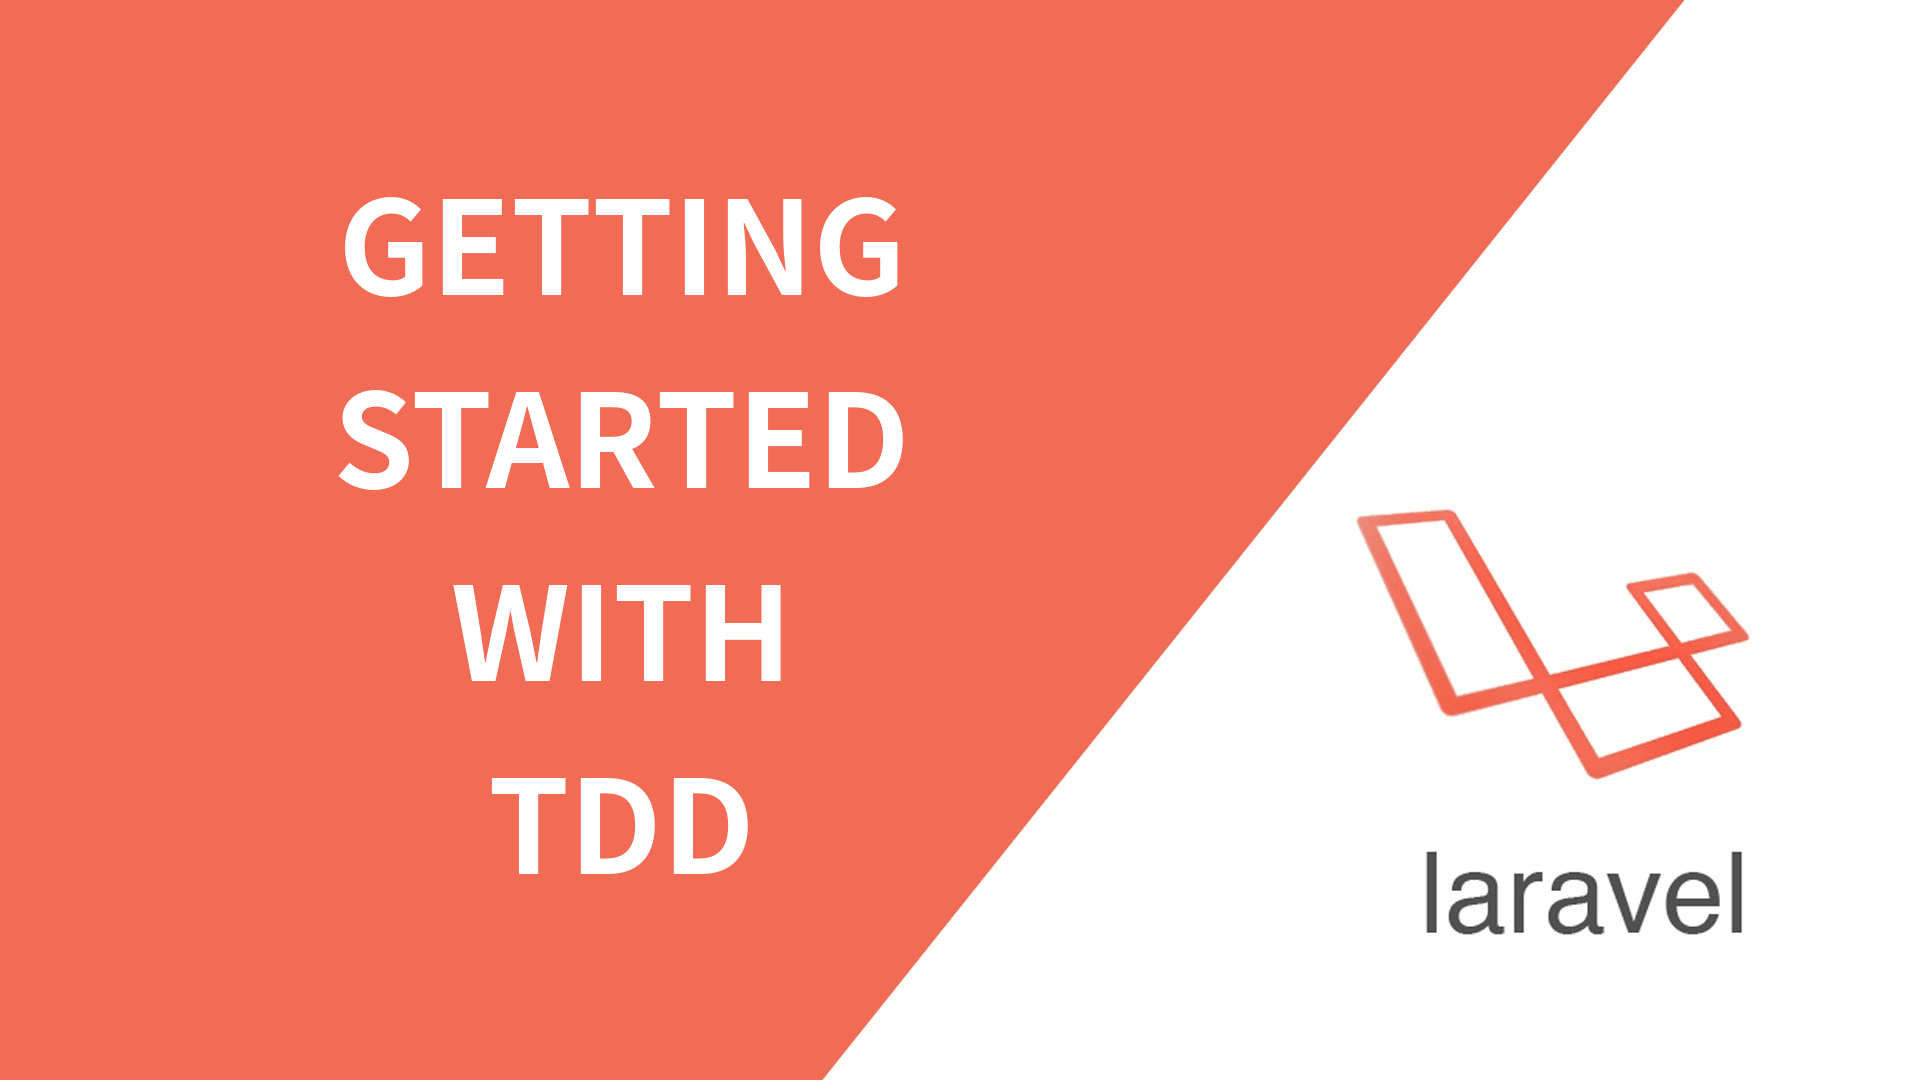 Crud Logo - Getting started with TDD in Laravel with CRUD Example – 5 Balloons